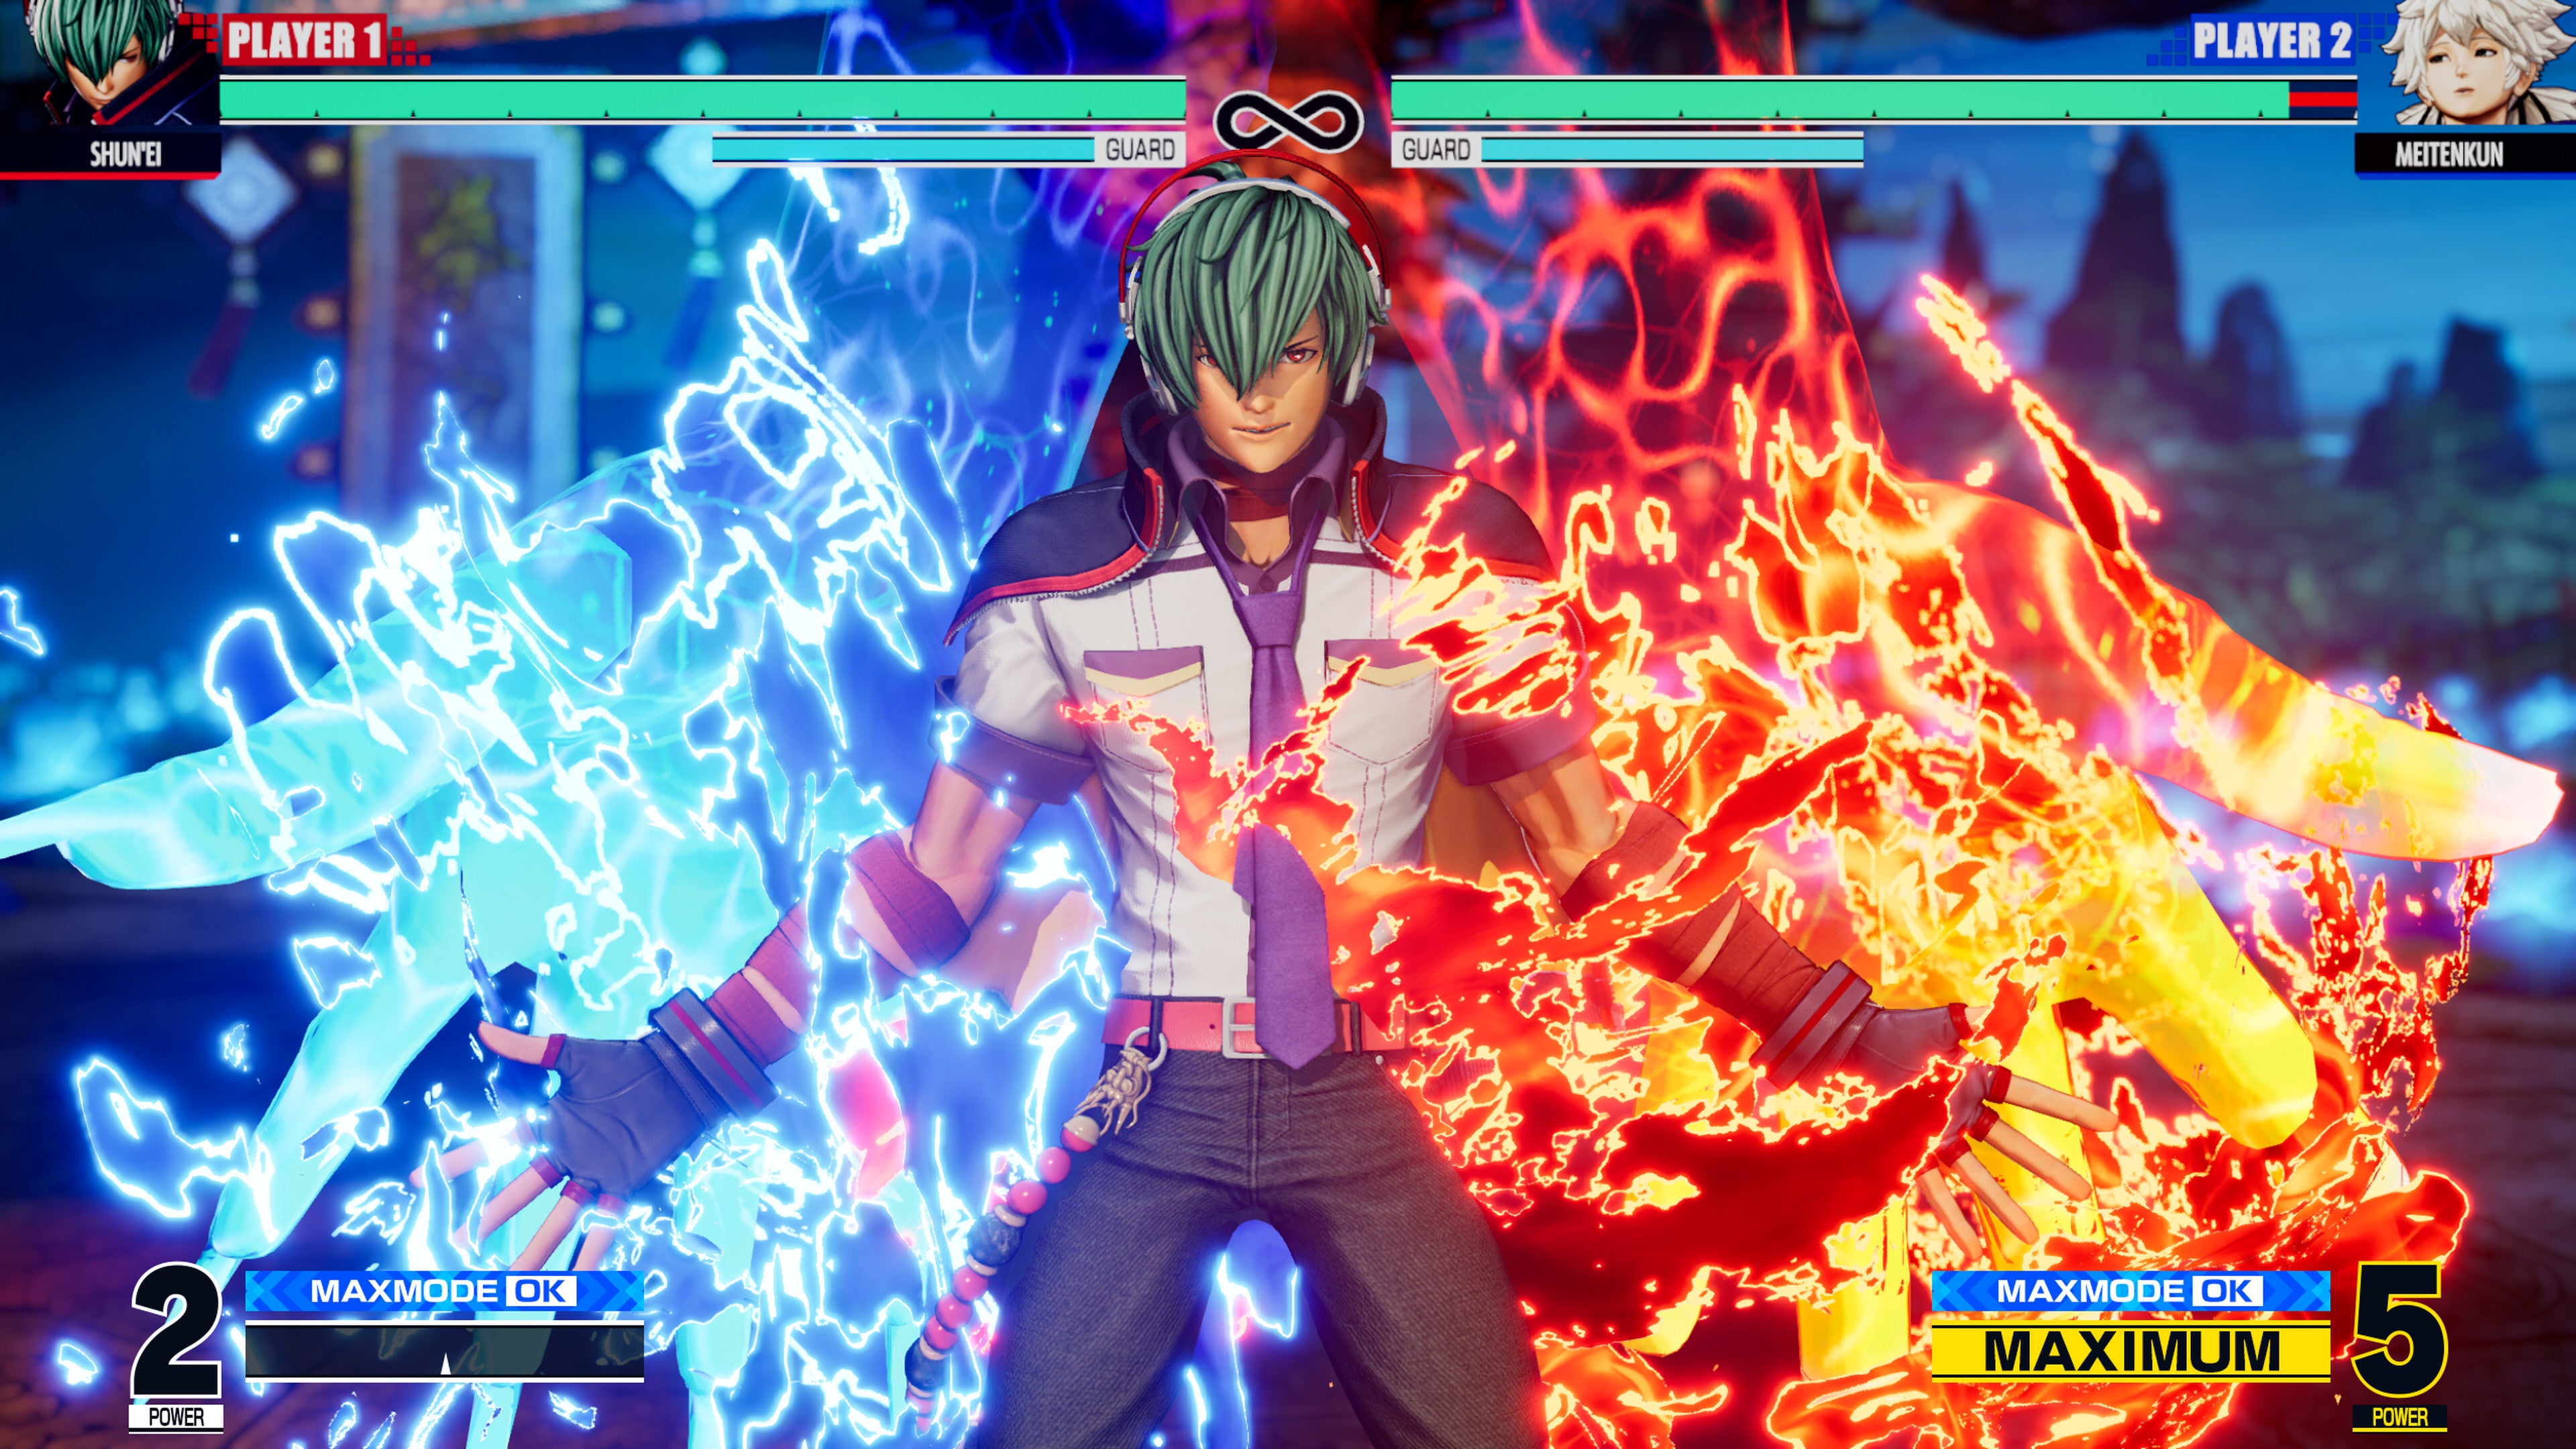 A screenshot of King Of Fighters XV showing Shun'ei, wearing a short sleeved shirt, tie, wallet chain and mini cape, wielding red and blue spectral... hands? Wings? He looks like a magic skate punk bus driver, honestly.